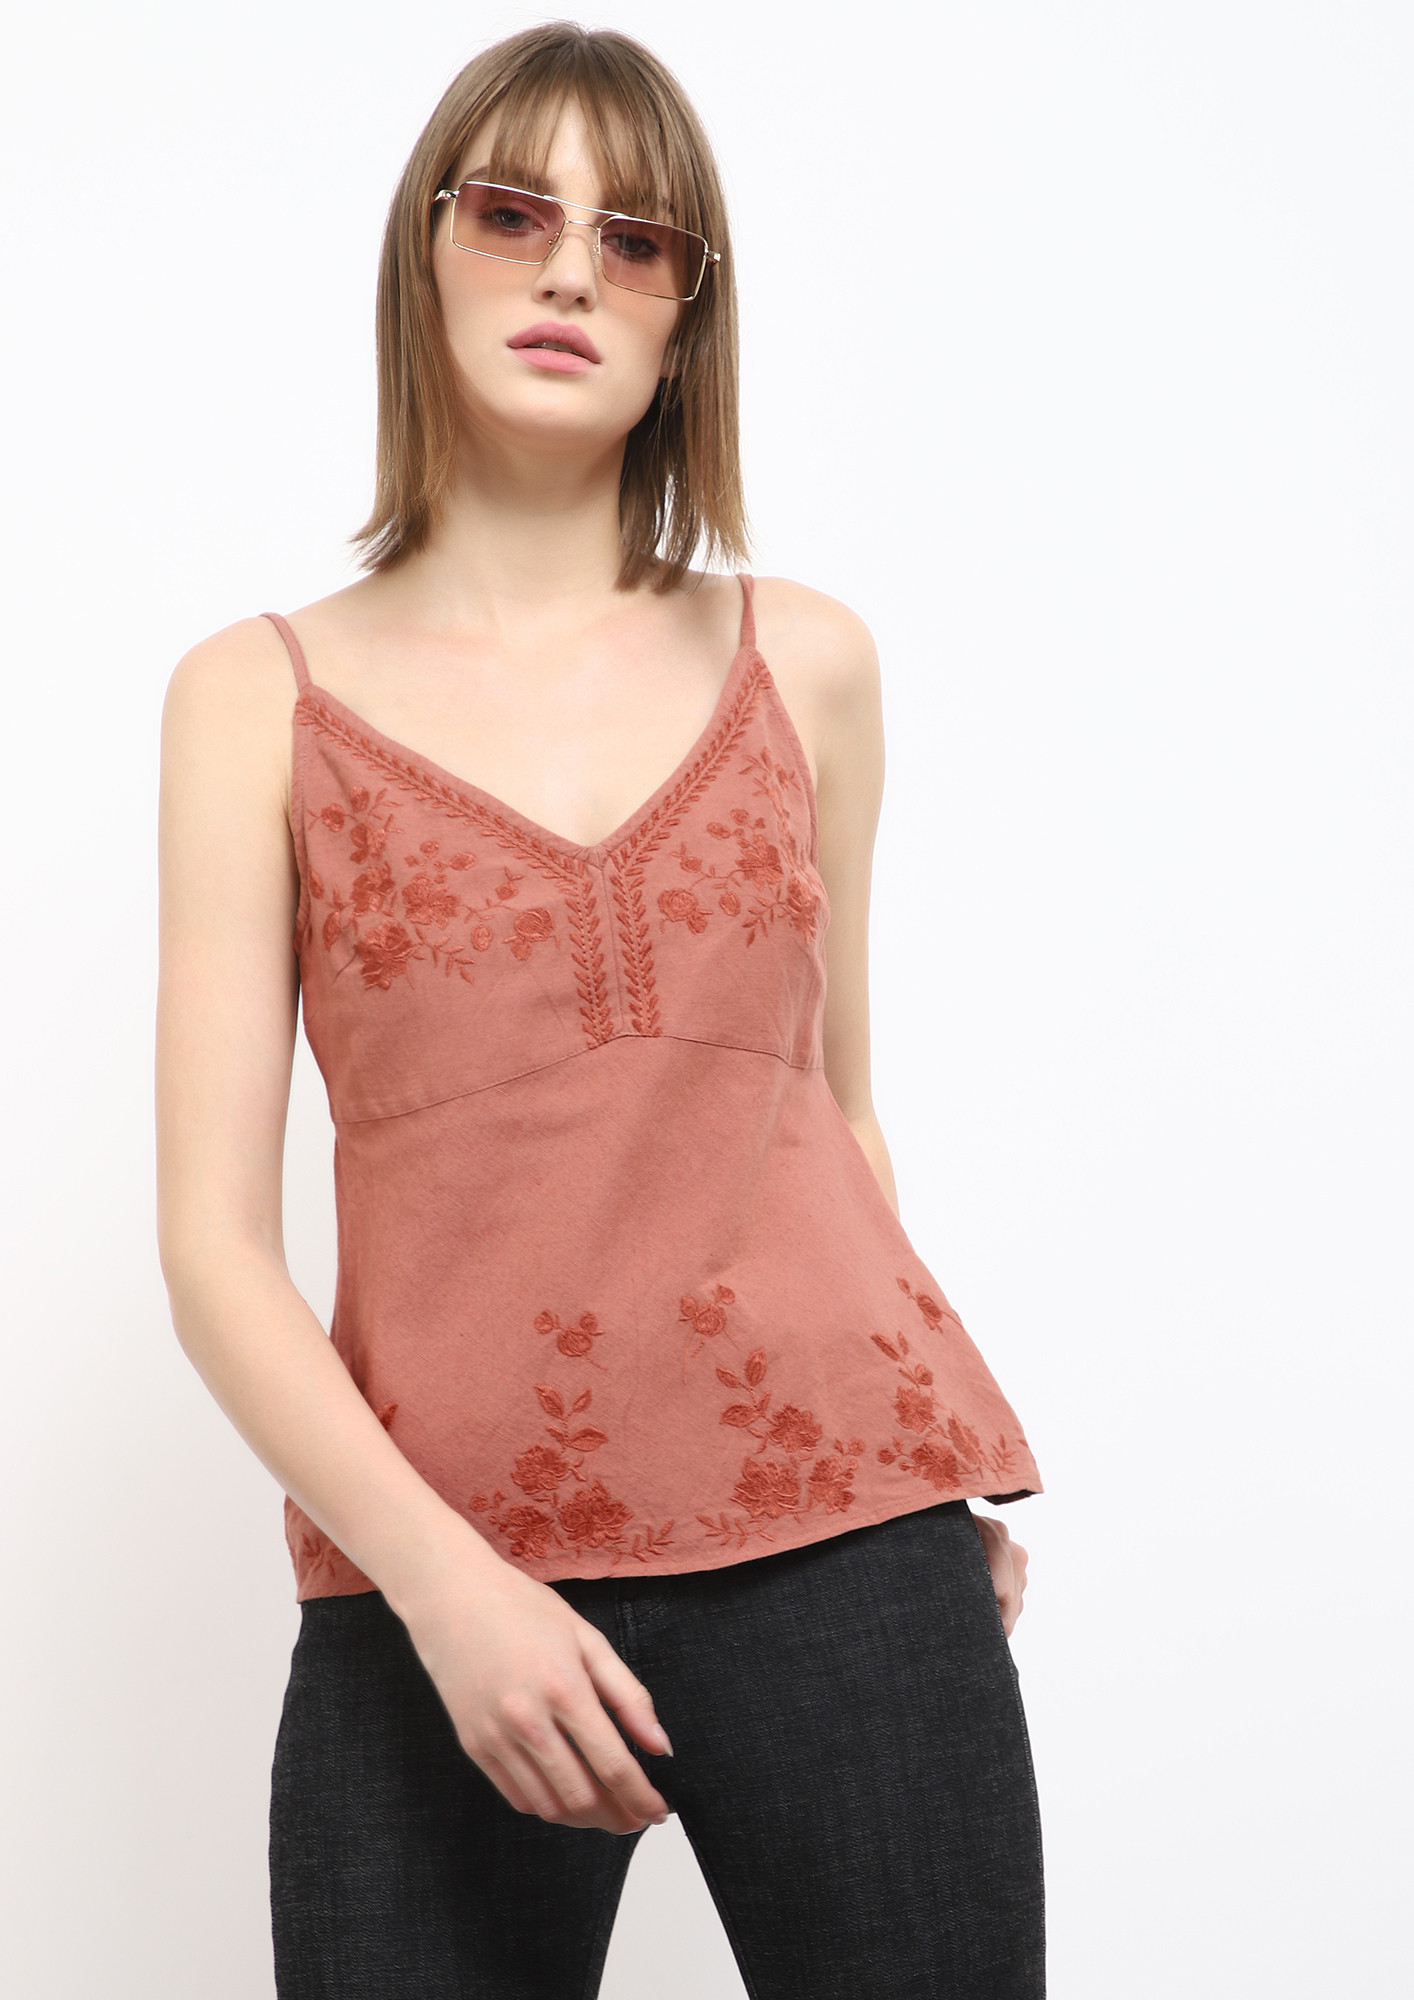 SHAN'T BE LATE BROWN CAMI TOP